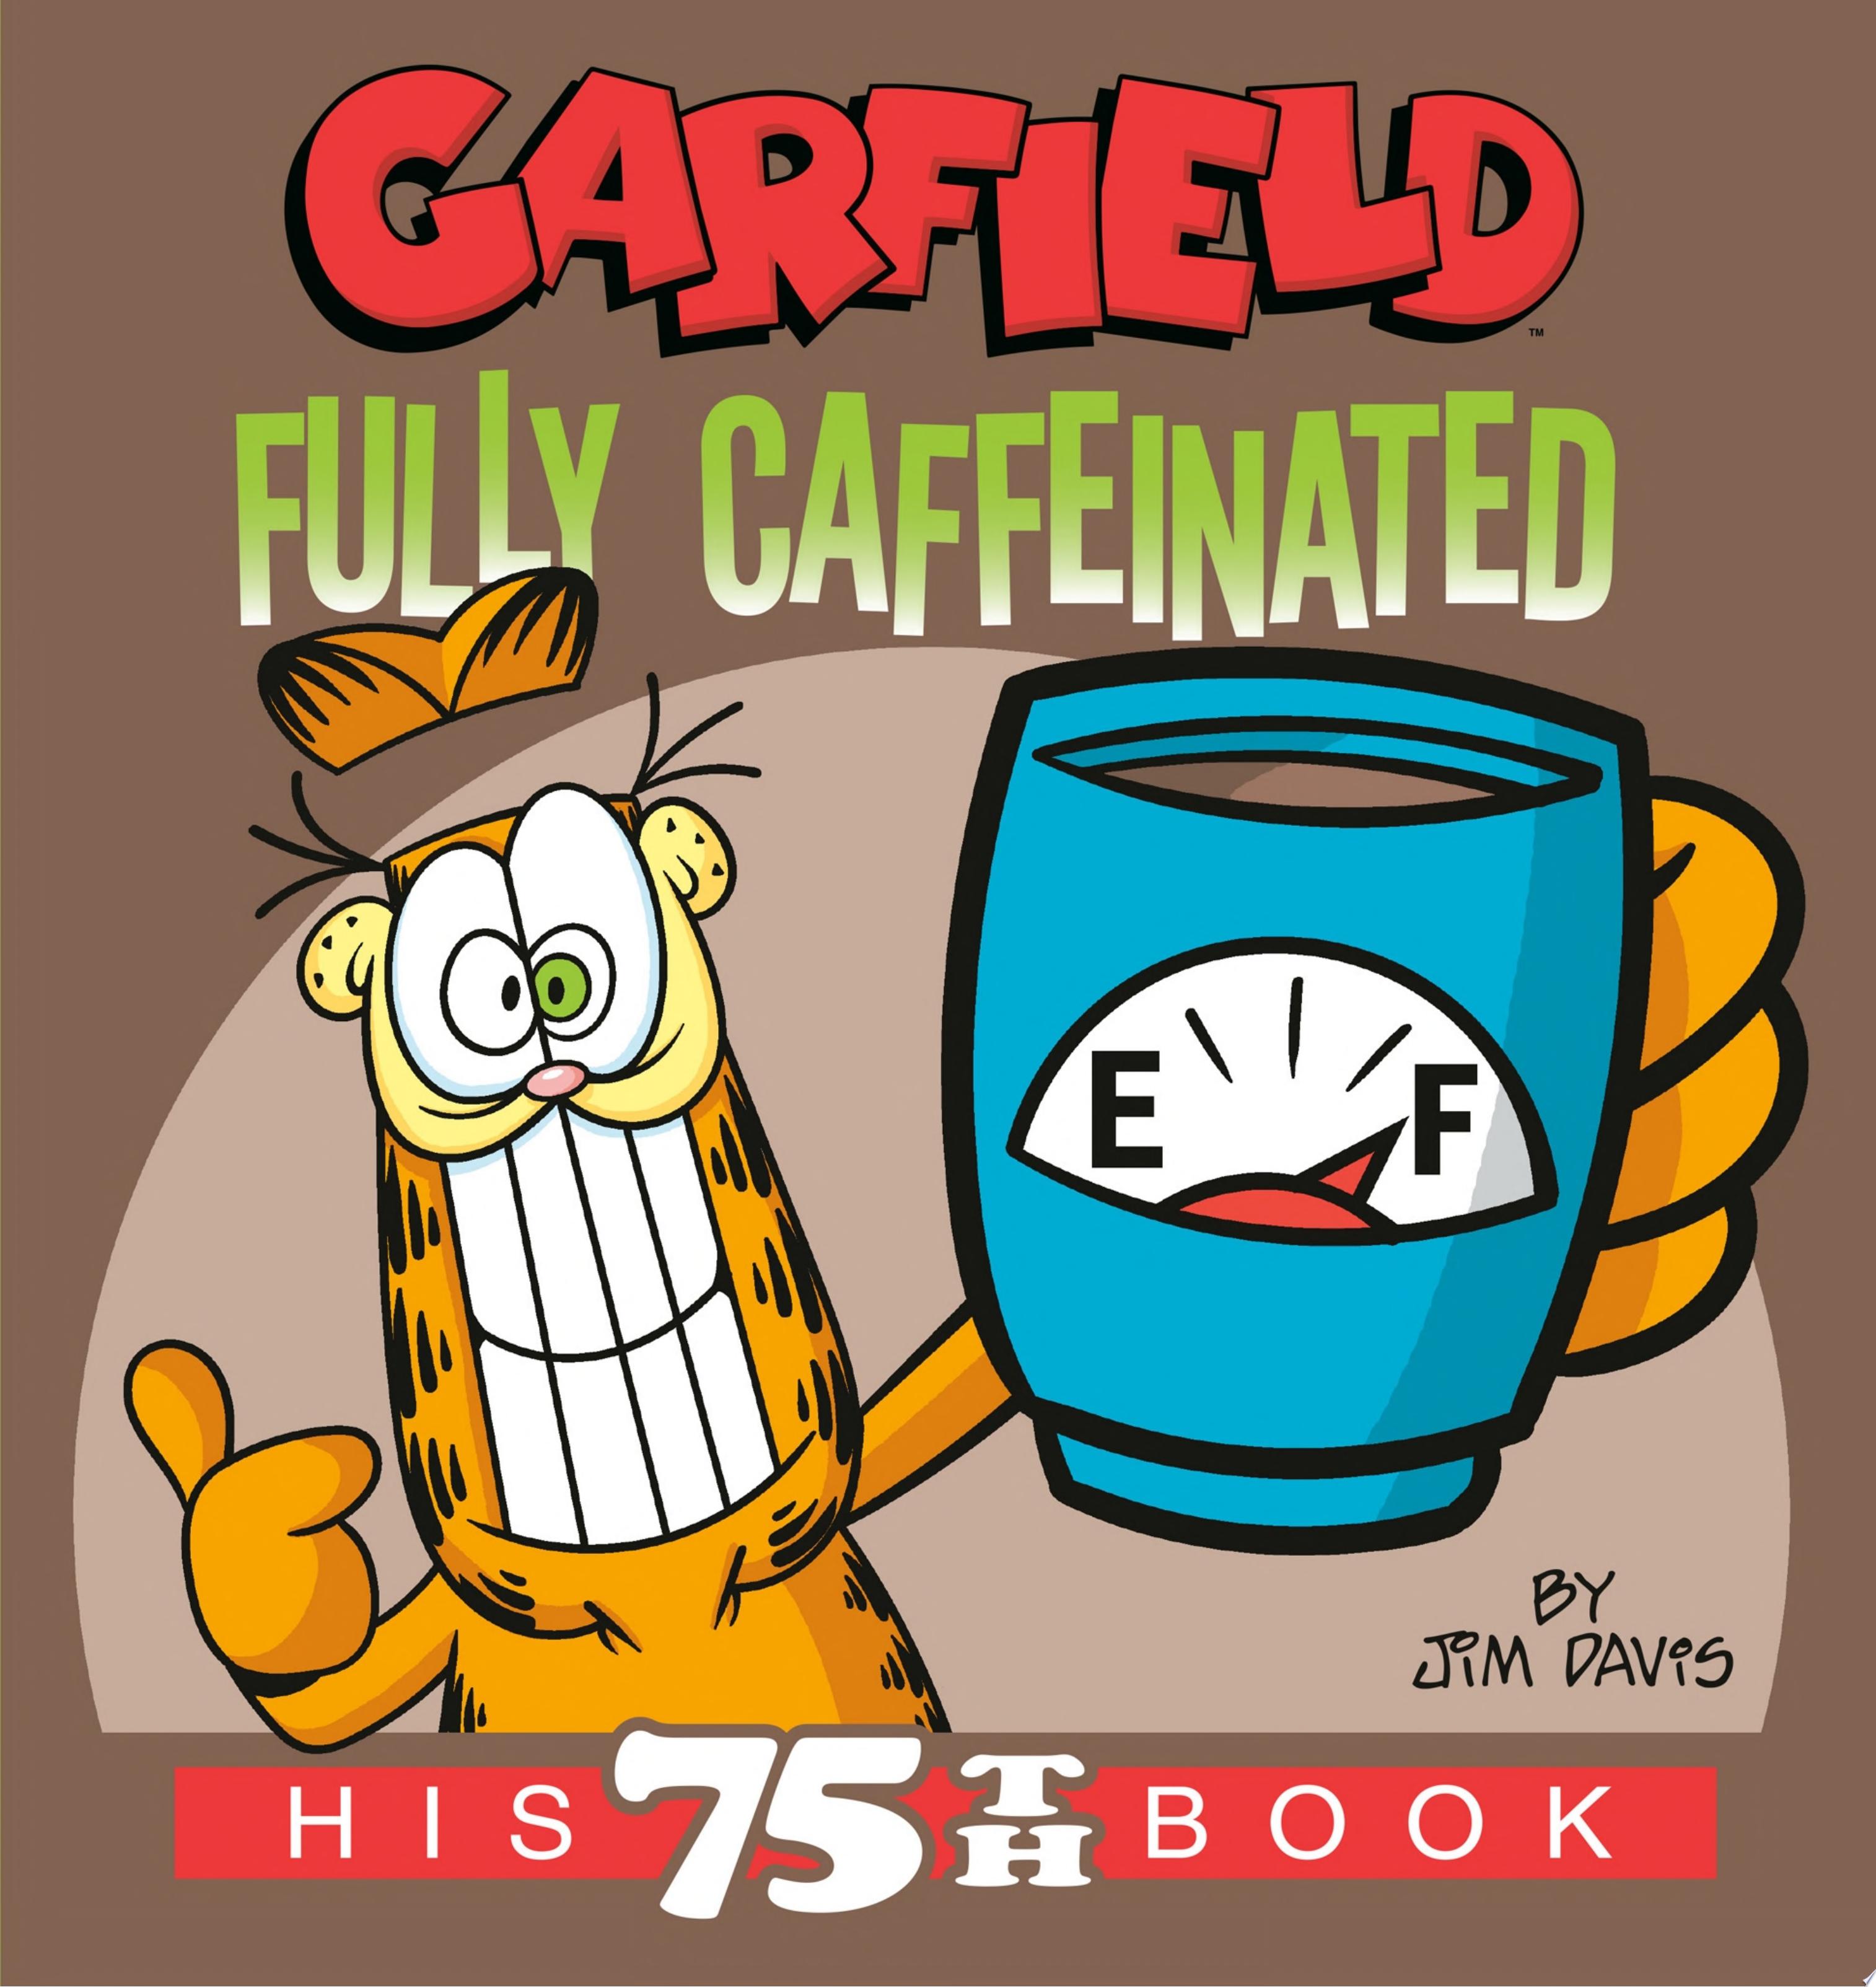 Image for "Garfield Fully Caffeinated"